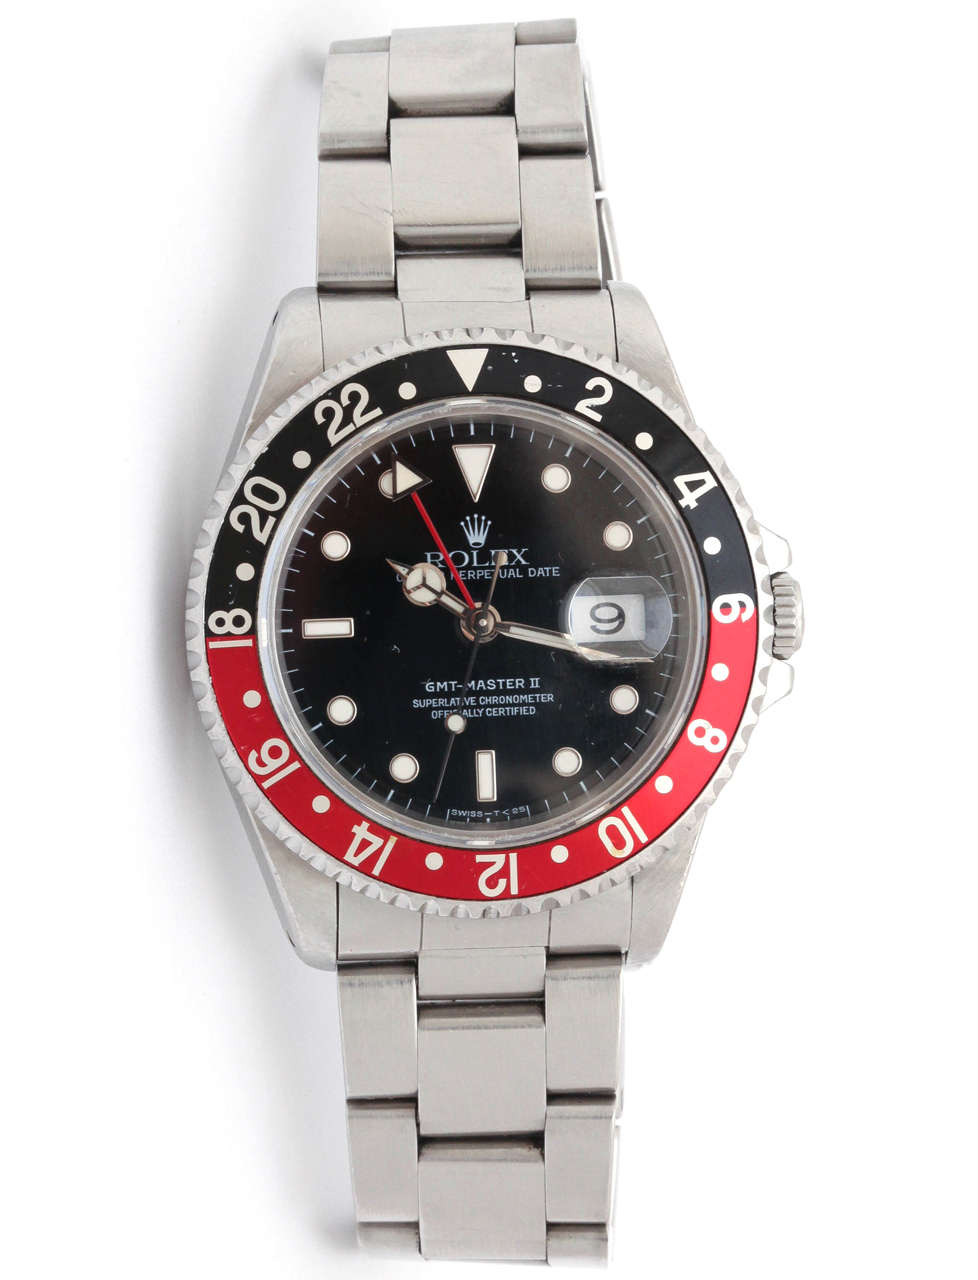 An Iconic Rolex GMT 'cherry coke' version with a red and black second time zone bezel, as opposed to the more traditional blue and red colour.  The watch is in good, fully original, unpolished condition and is accompanied by the original sticker on